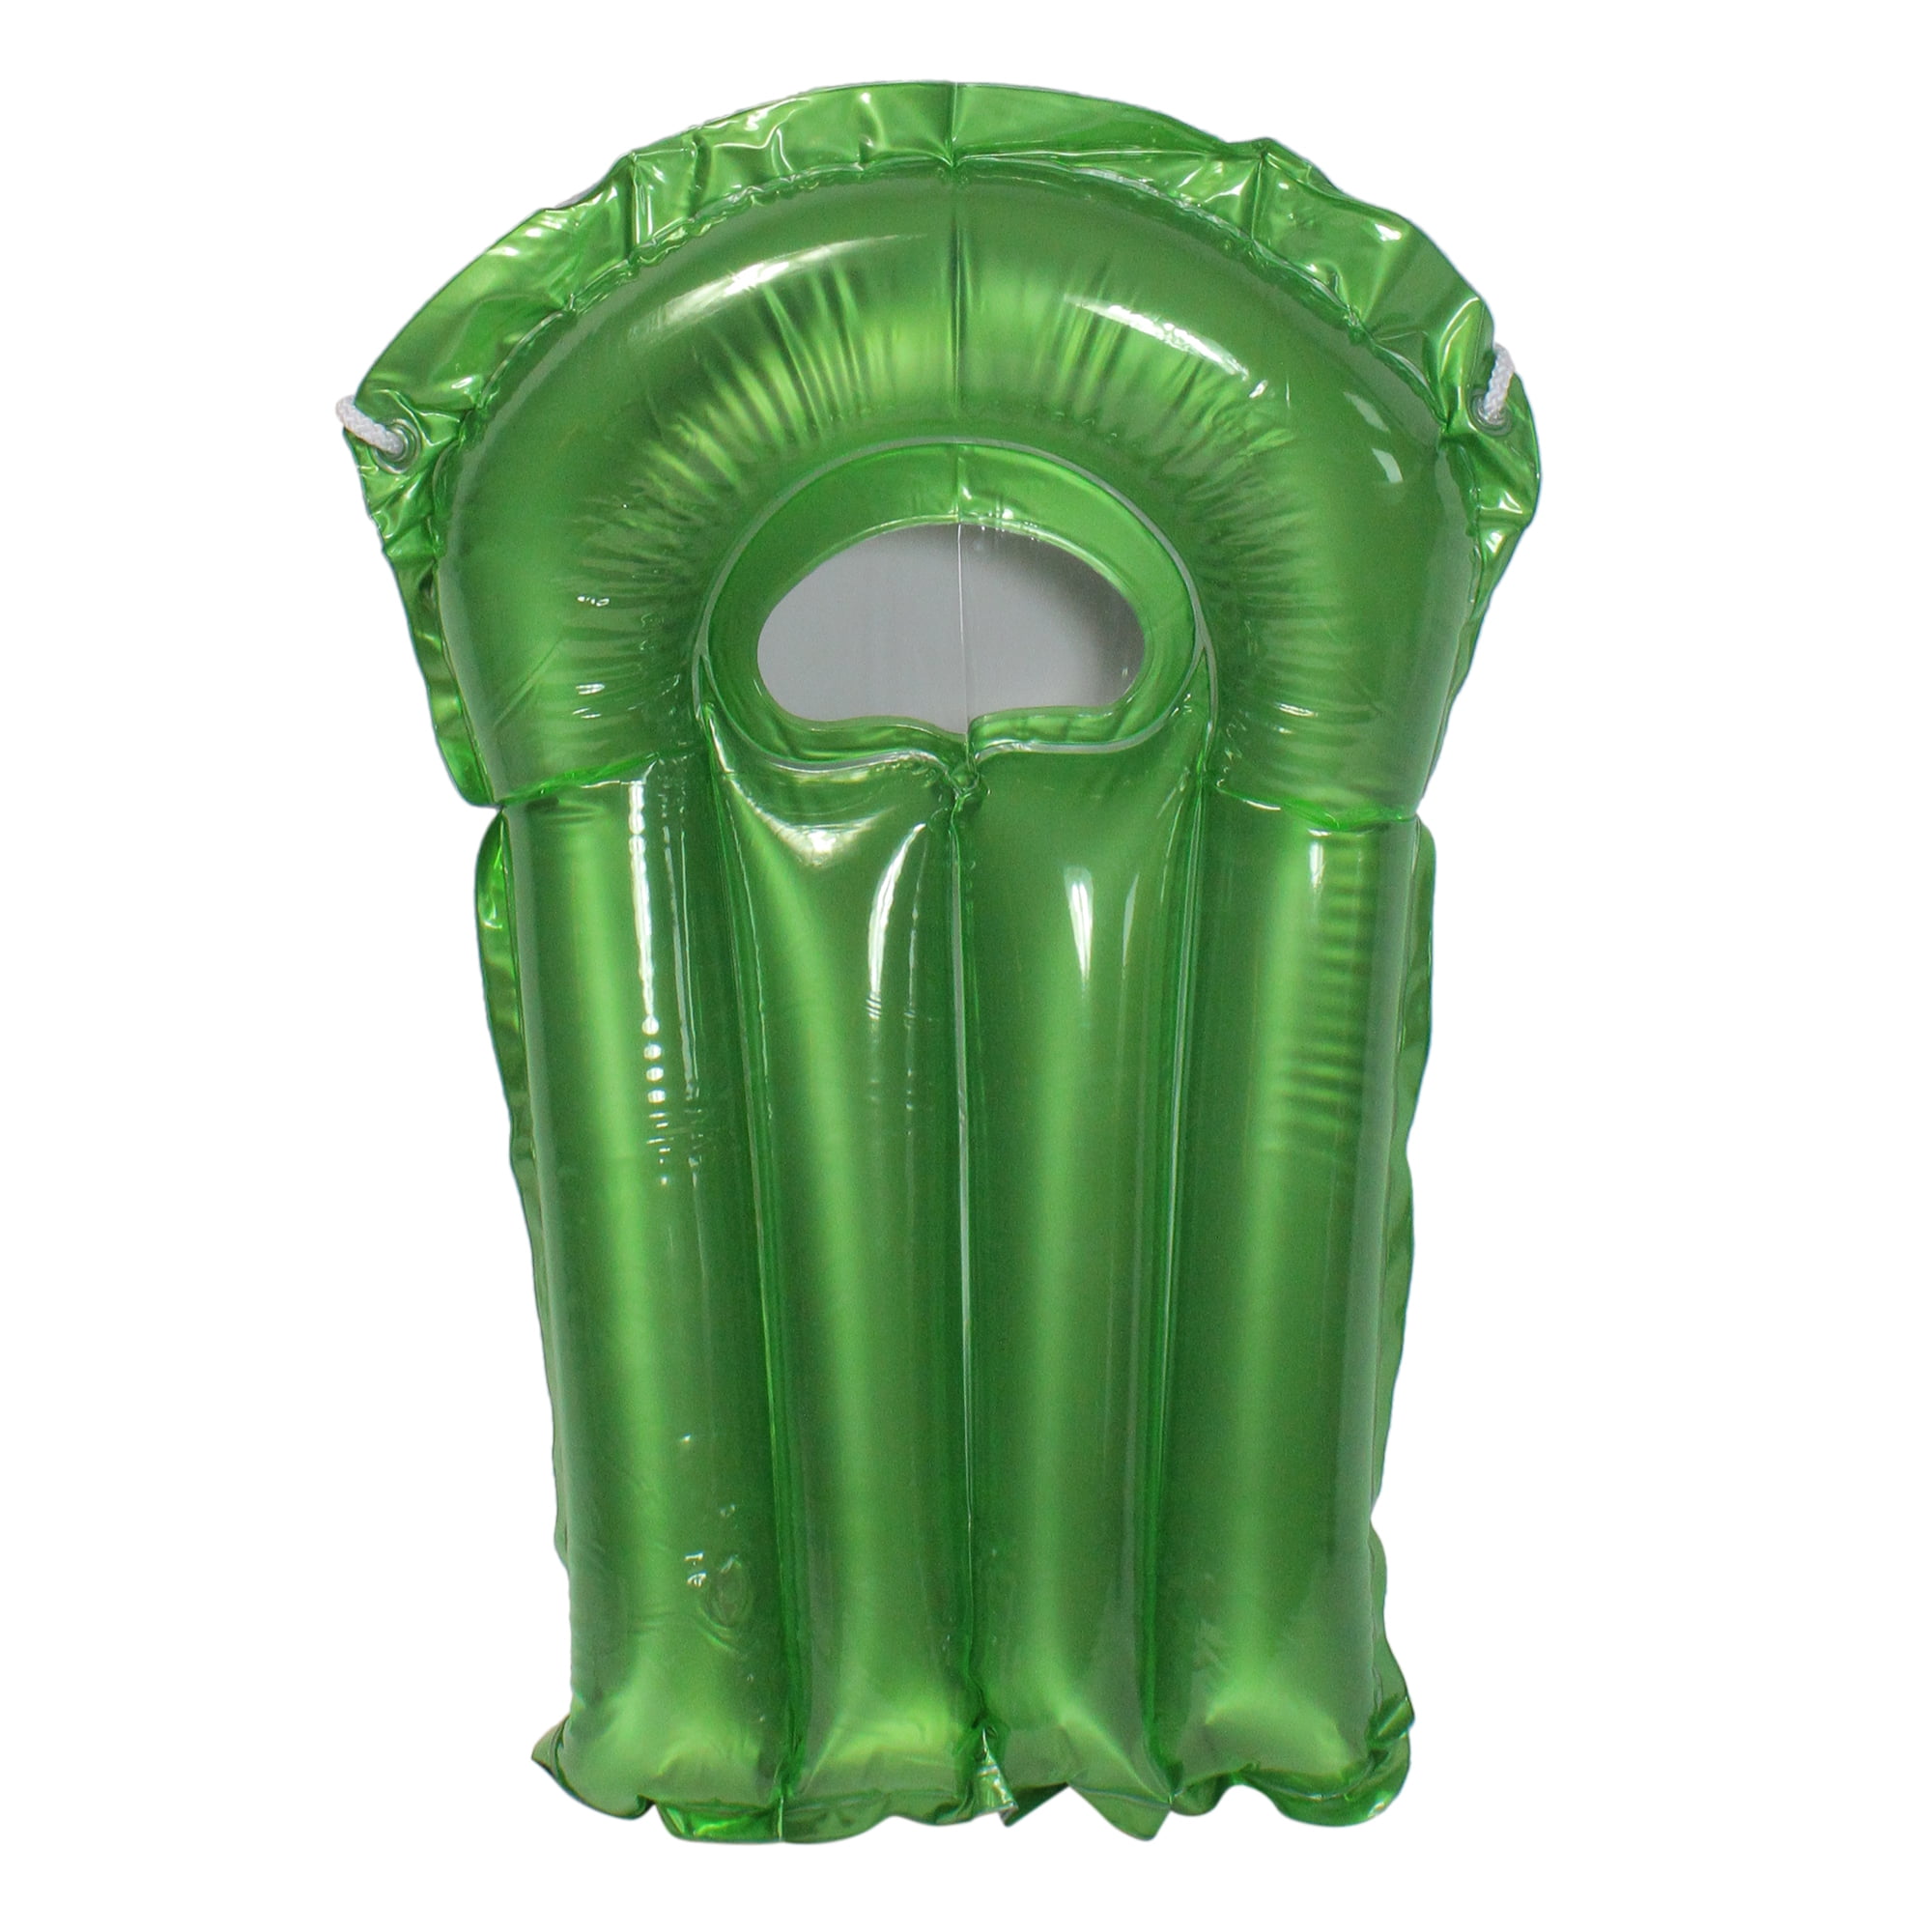 CHILDRENS SURF RIDER POOL FLOAT RAFT GREEN 44.8 IN X 20 IN NEW ITEM 